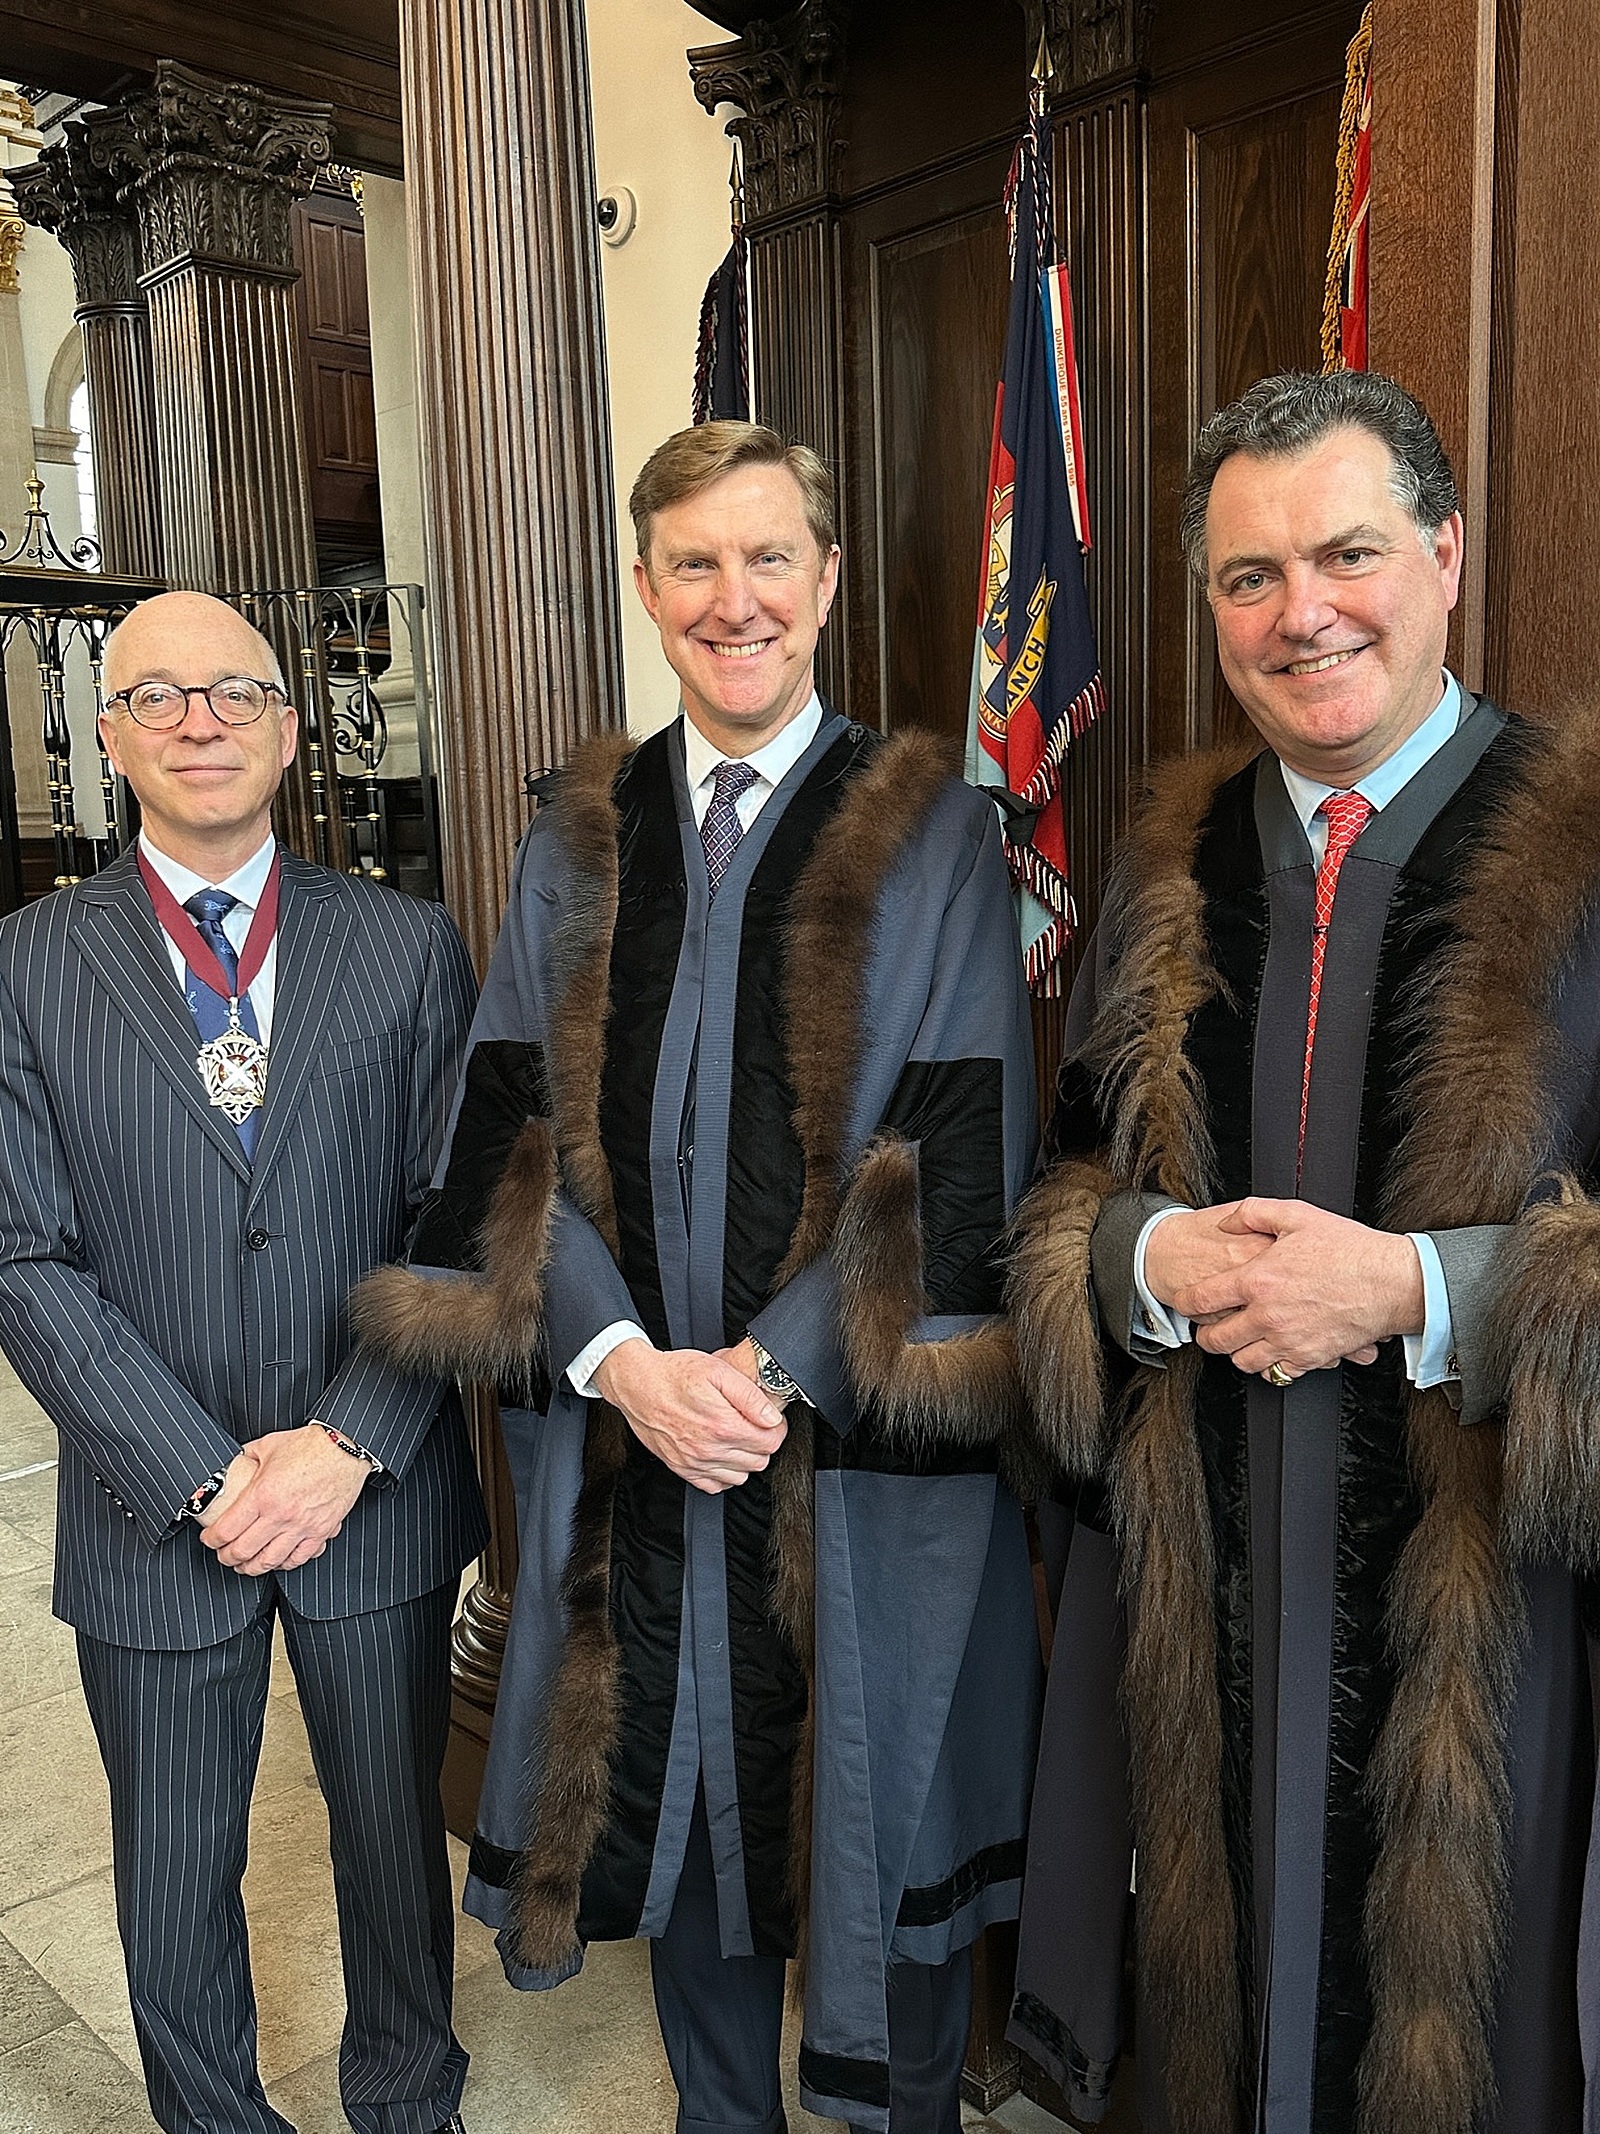 The Ward of Cheap Club President Mark Magnacca, along with Alderman Robert Hughes-Penney, and Alderman Vincent Keaveny convened at the Wardmote for the re-election of Alderman Robert Hughes-Penney in the Commonwealth Chapel.